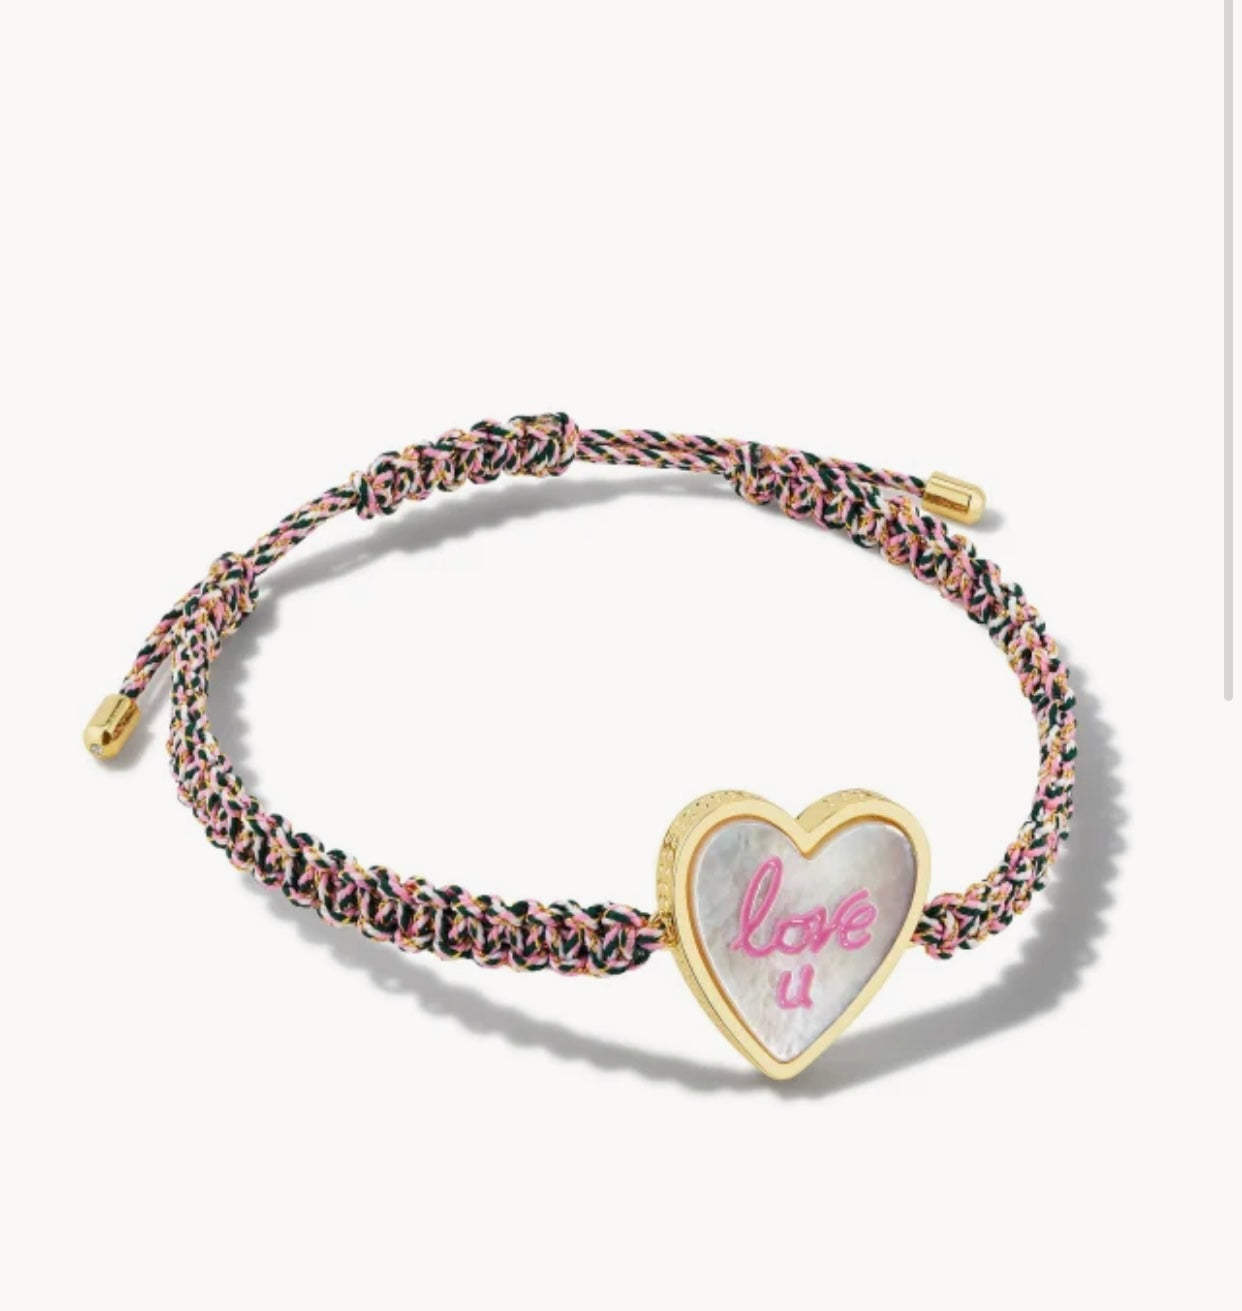 Love U Ivory Mother of Pearl Gold Braided Bracelet